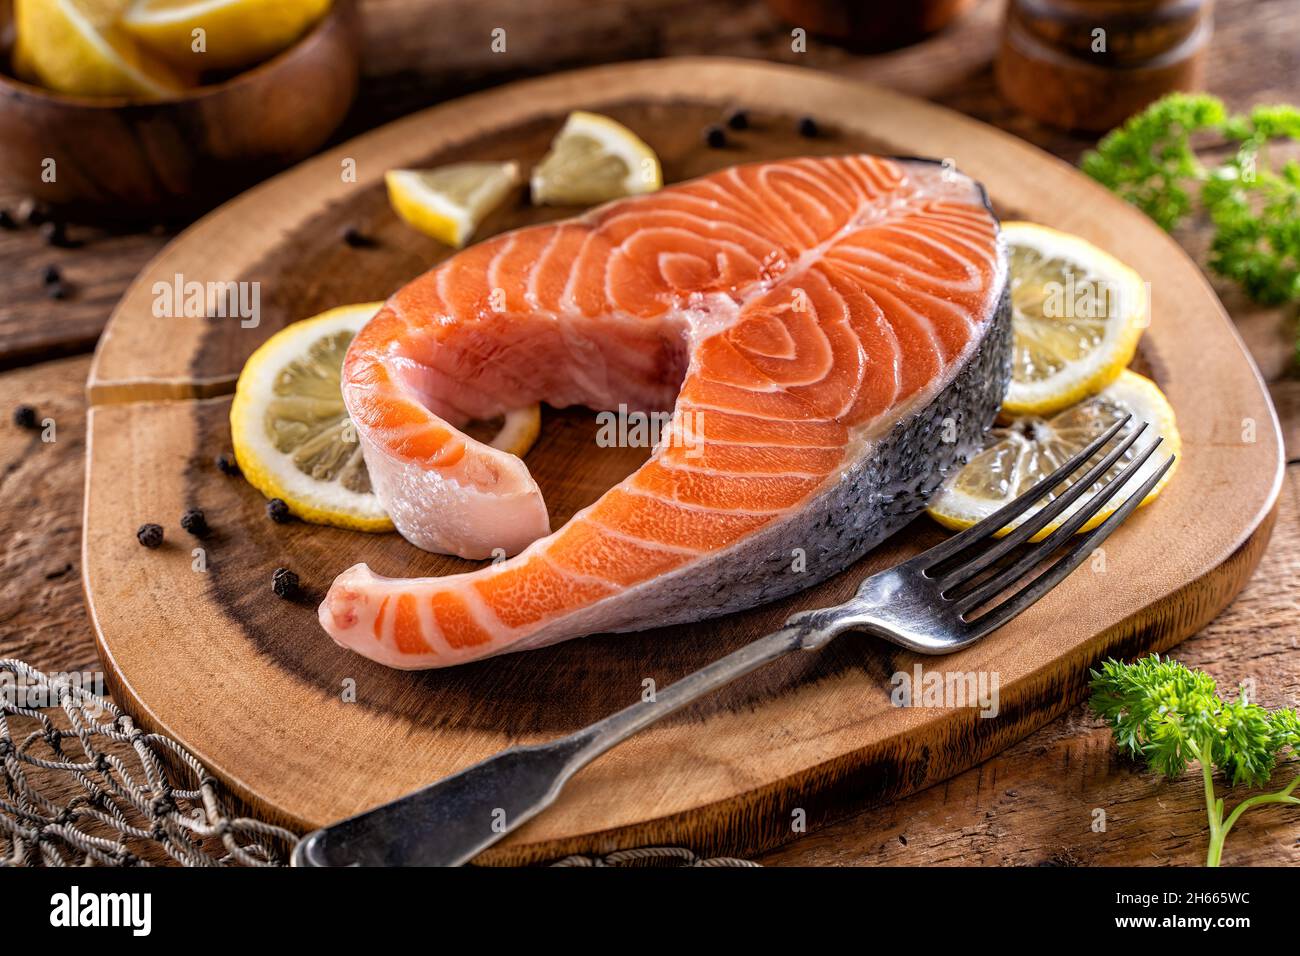 A fresh salmon steak on a rustic wood table top with lemon, peppercorn and parsley. Stock Photo